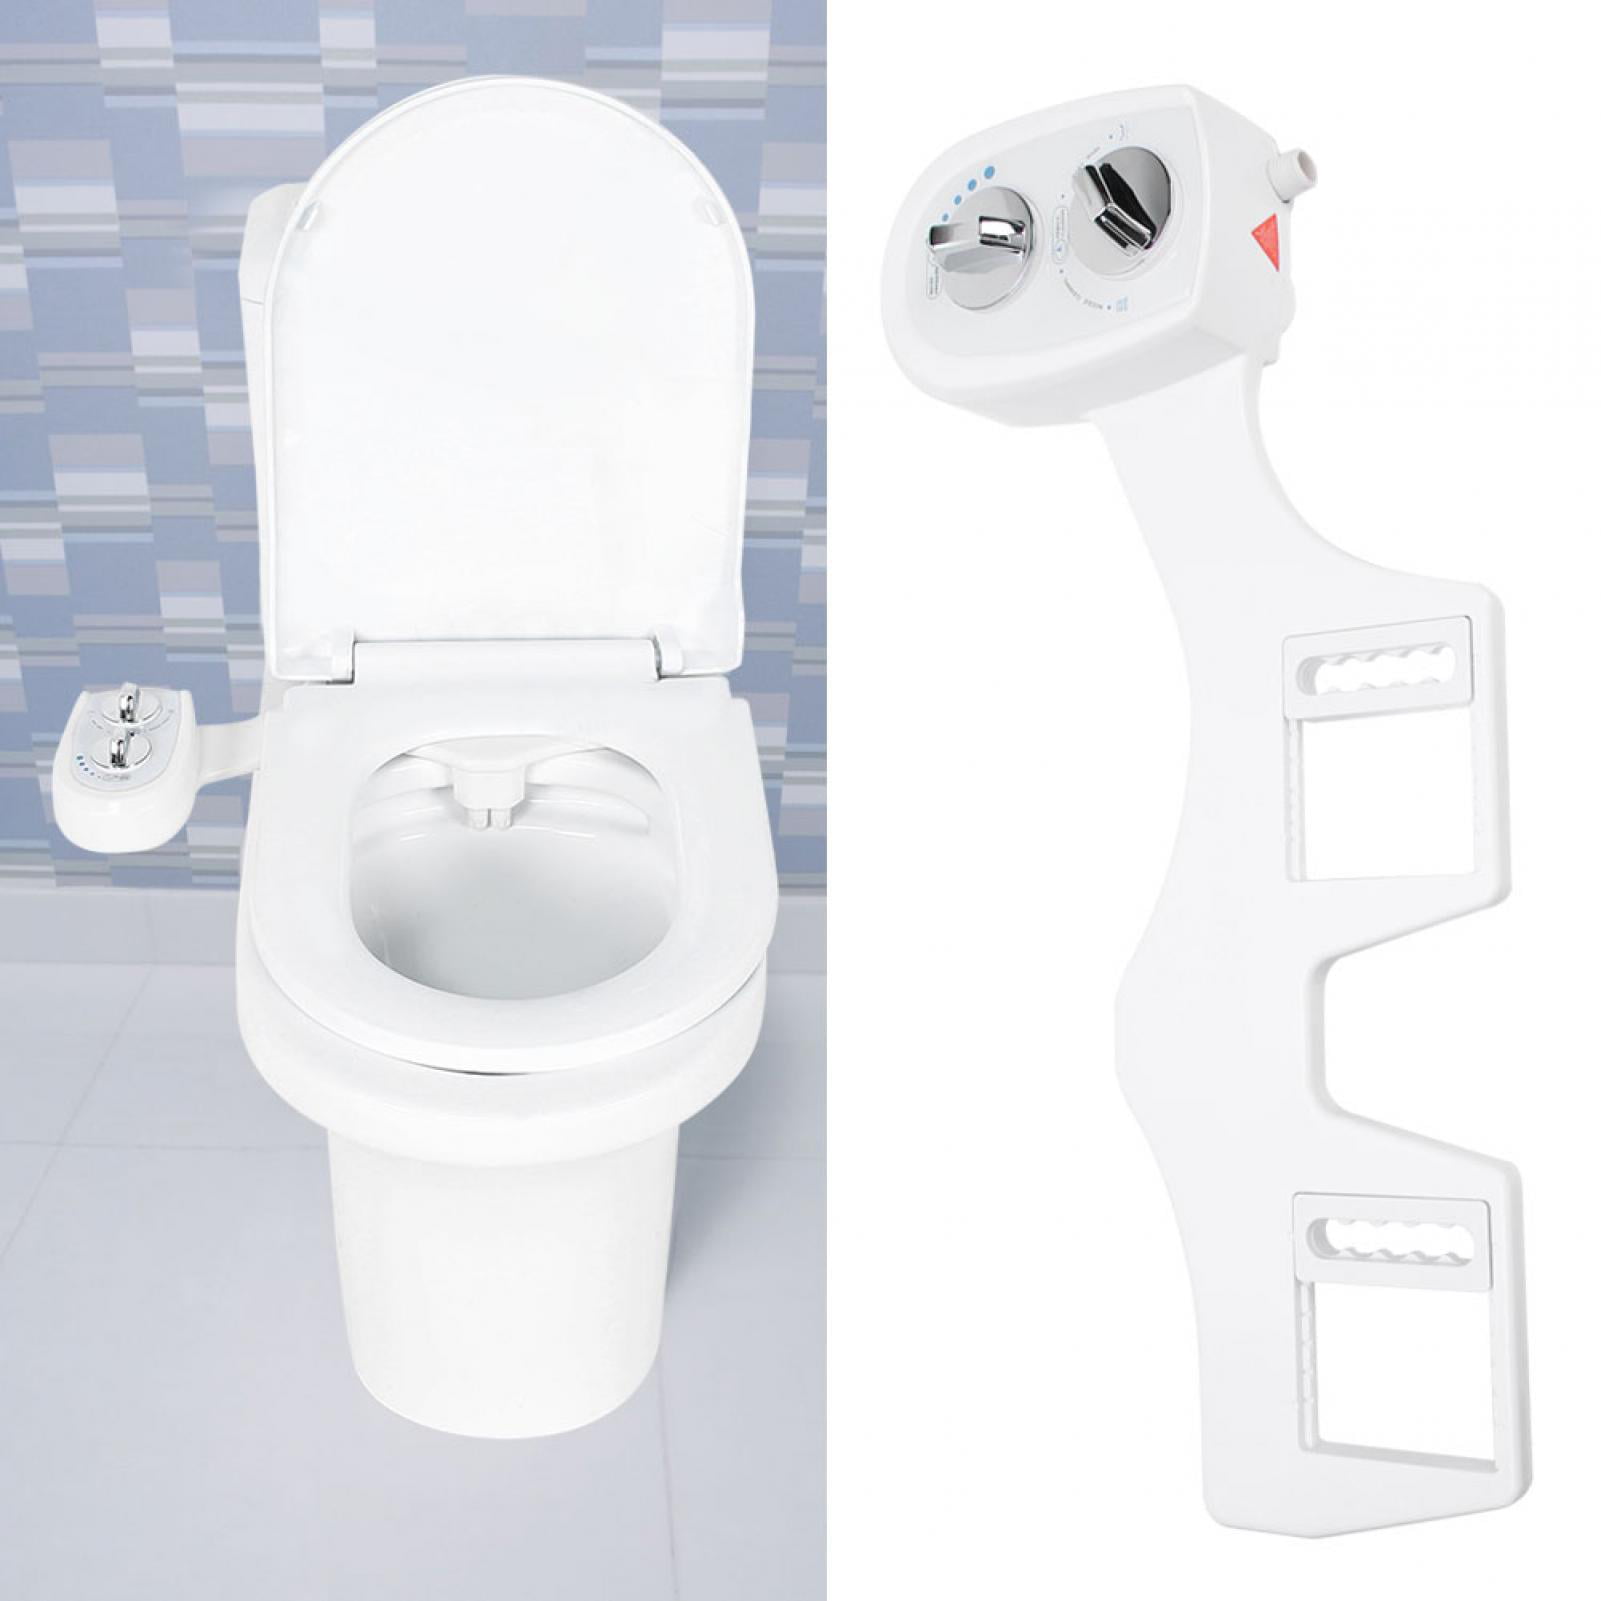 Dual Nozzle Bidet Toilet Attachment Self Cleaning Adjustable Water Pressure 